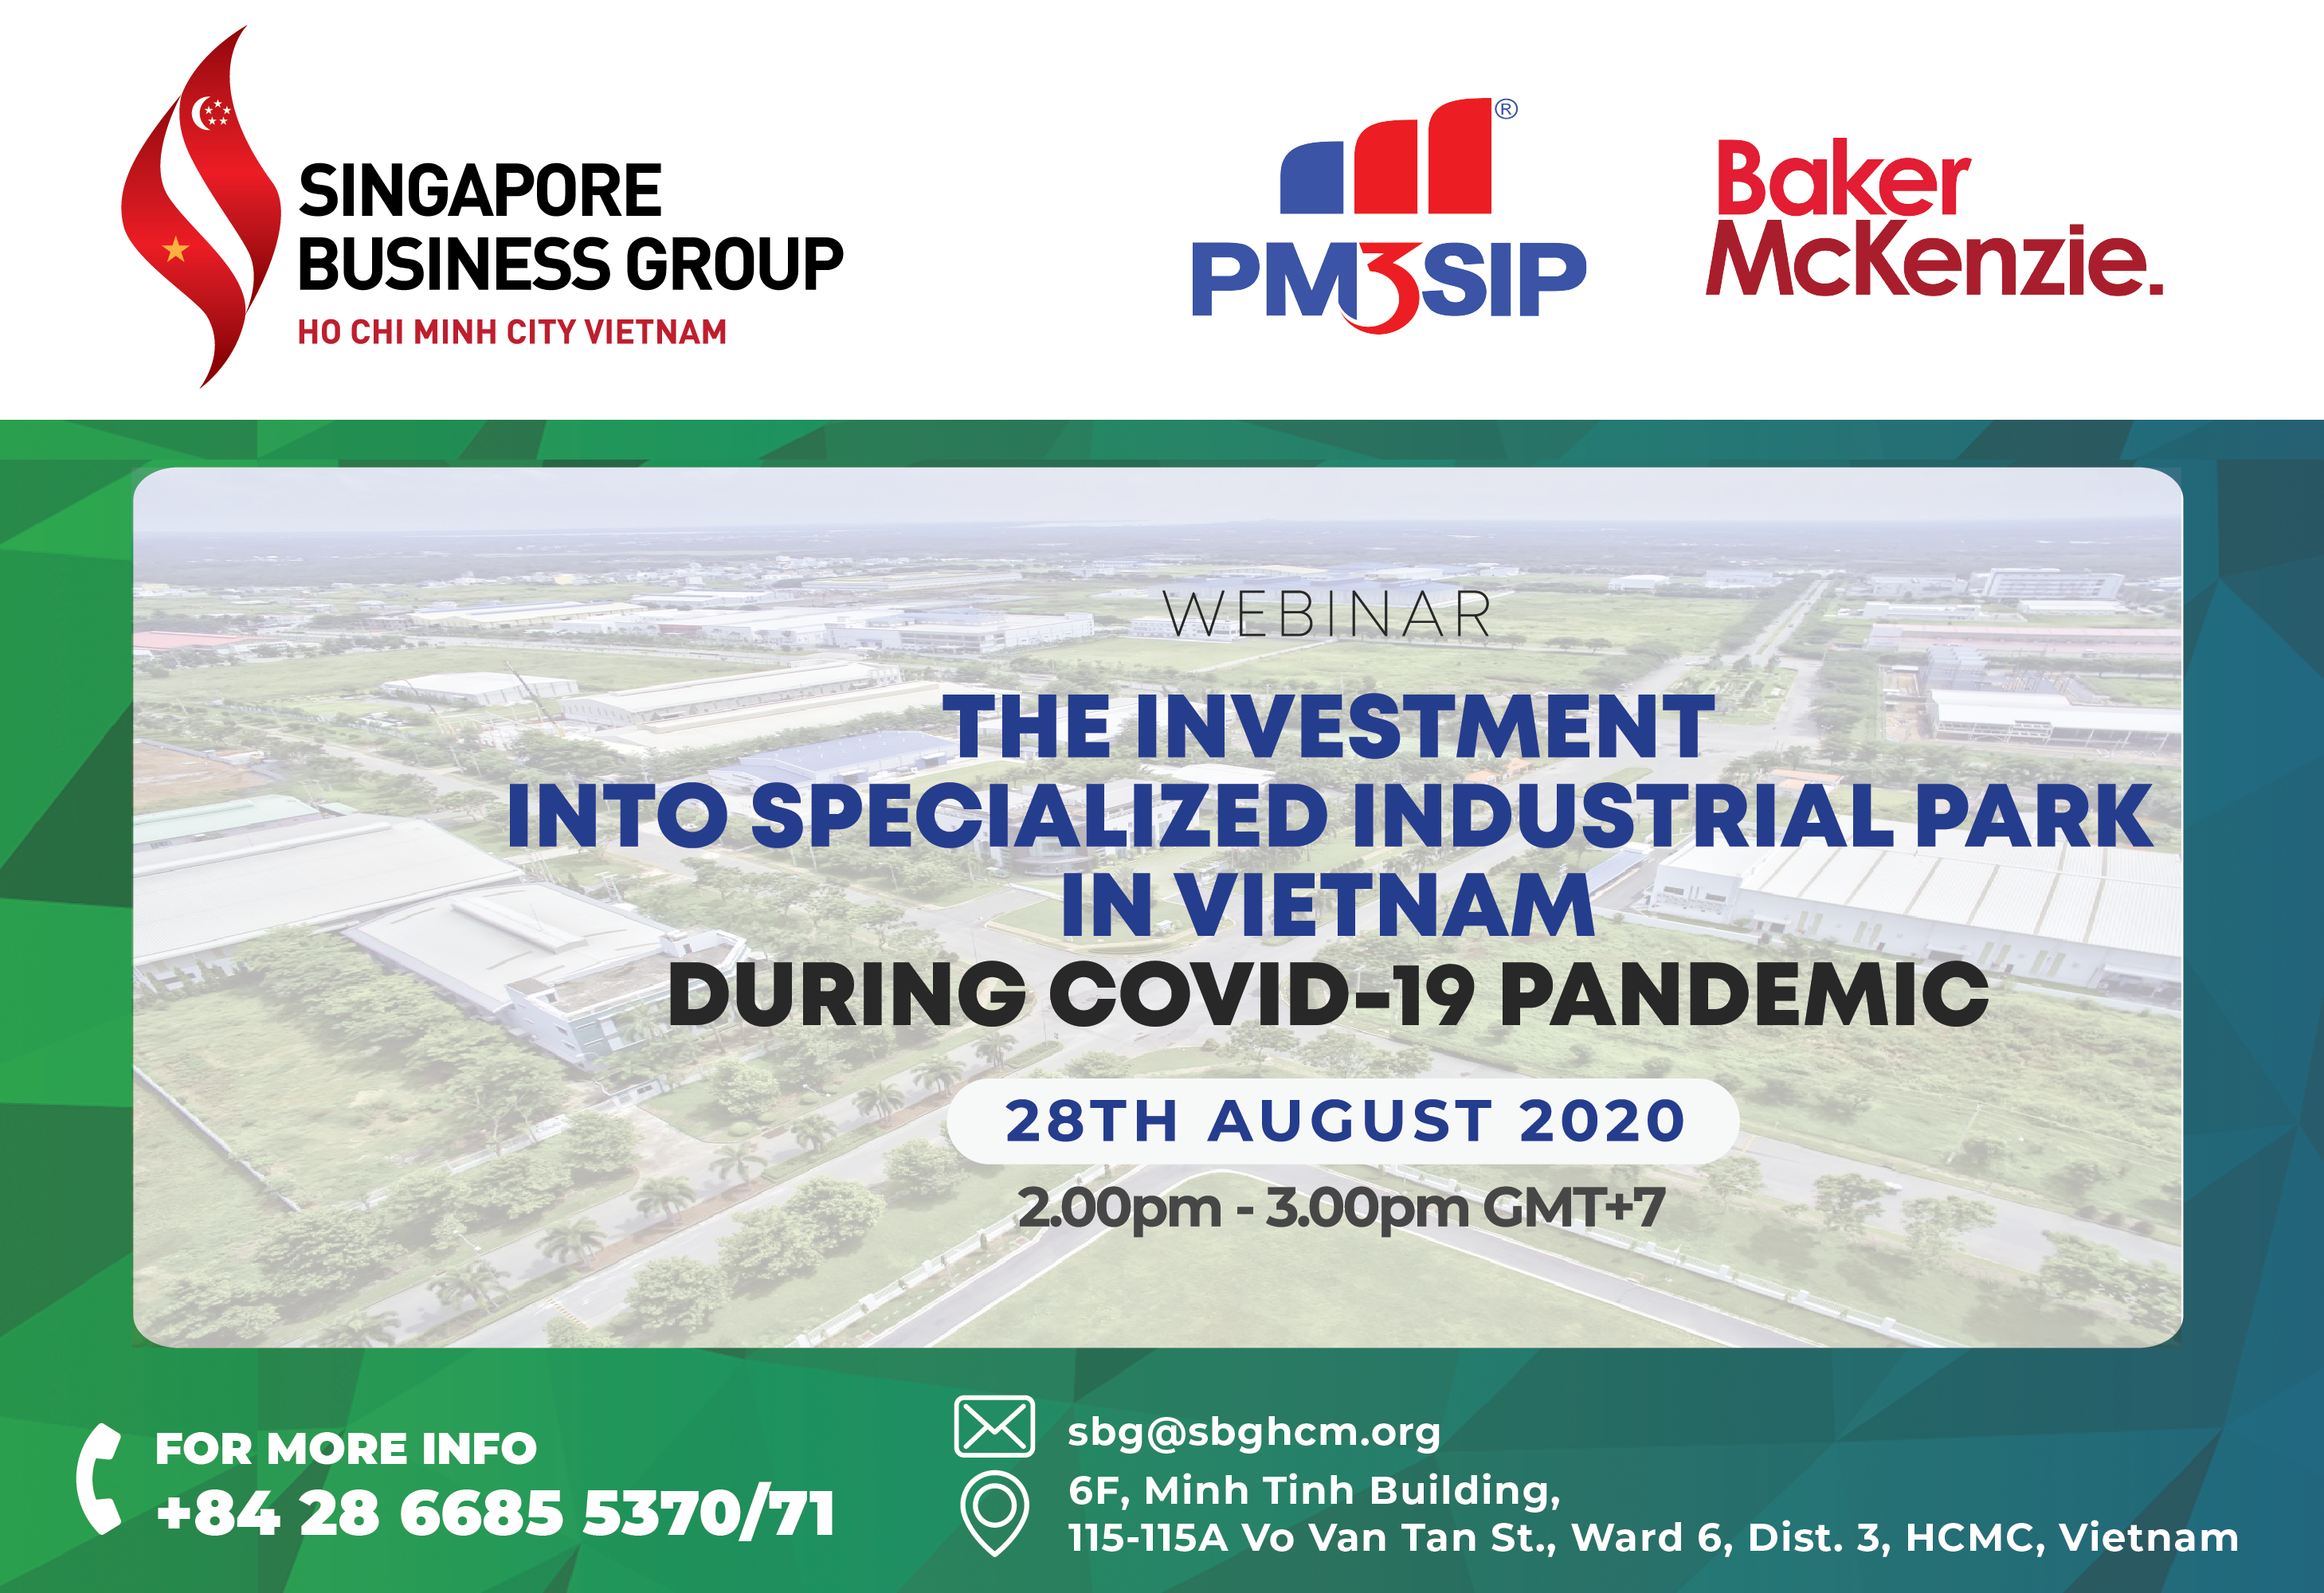 WEBINAR: The Investment Into Specialized Industrial Park In Vietnam During COVID-19 Pandemic